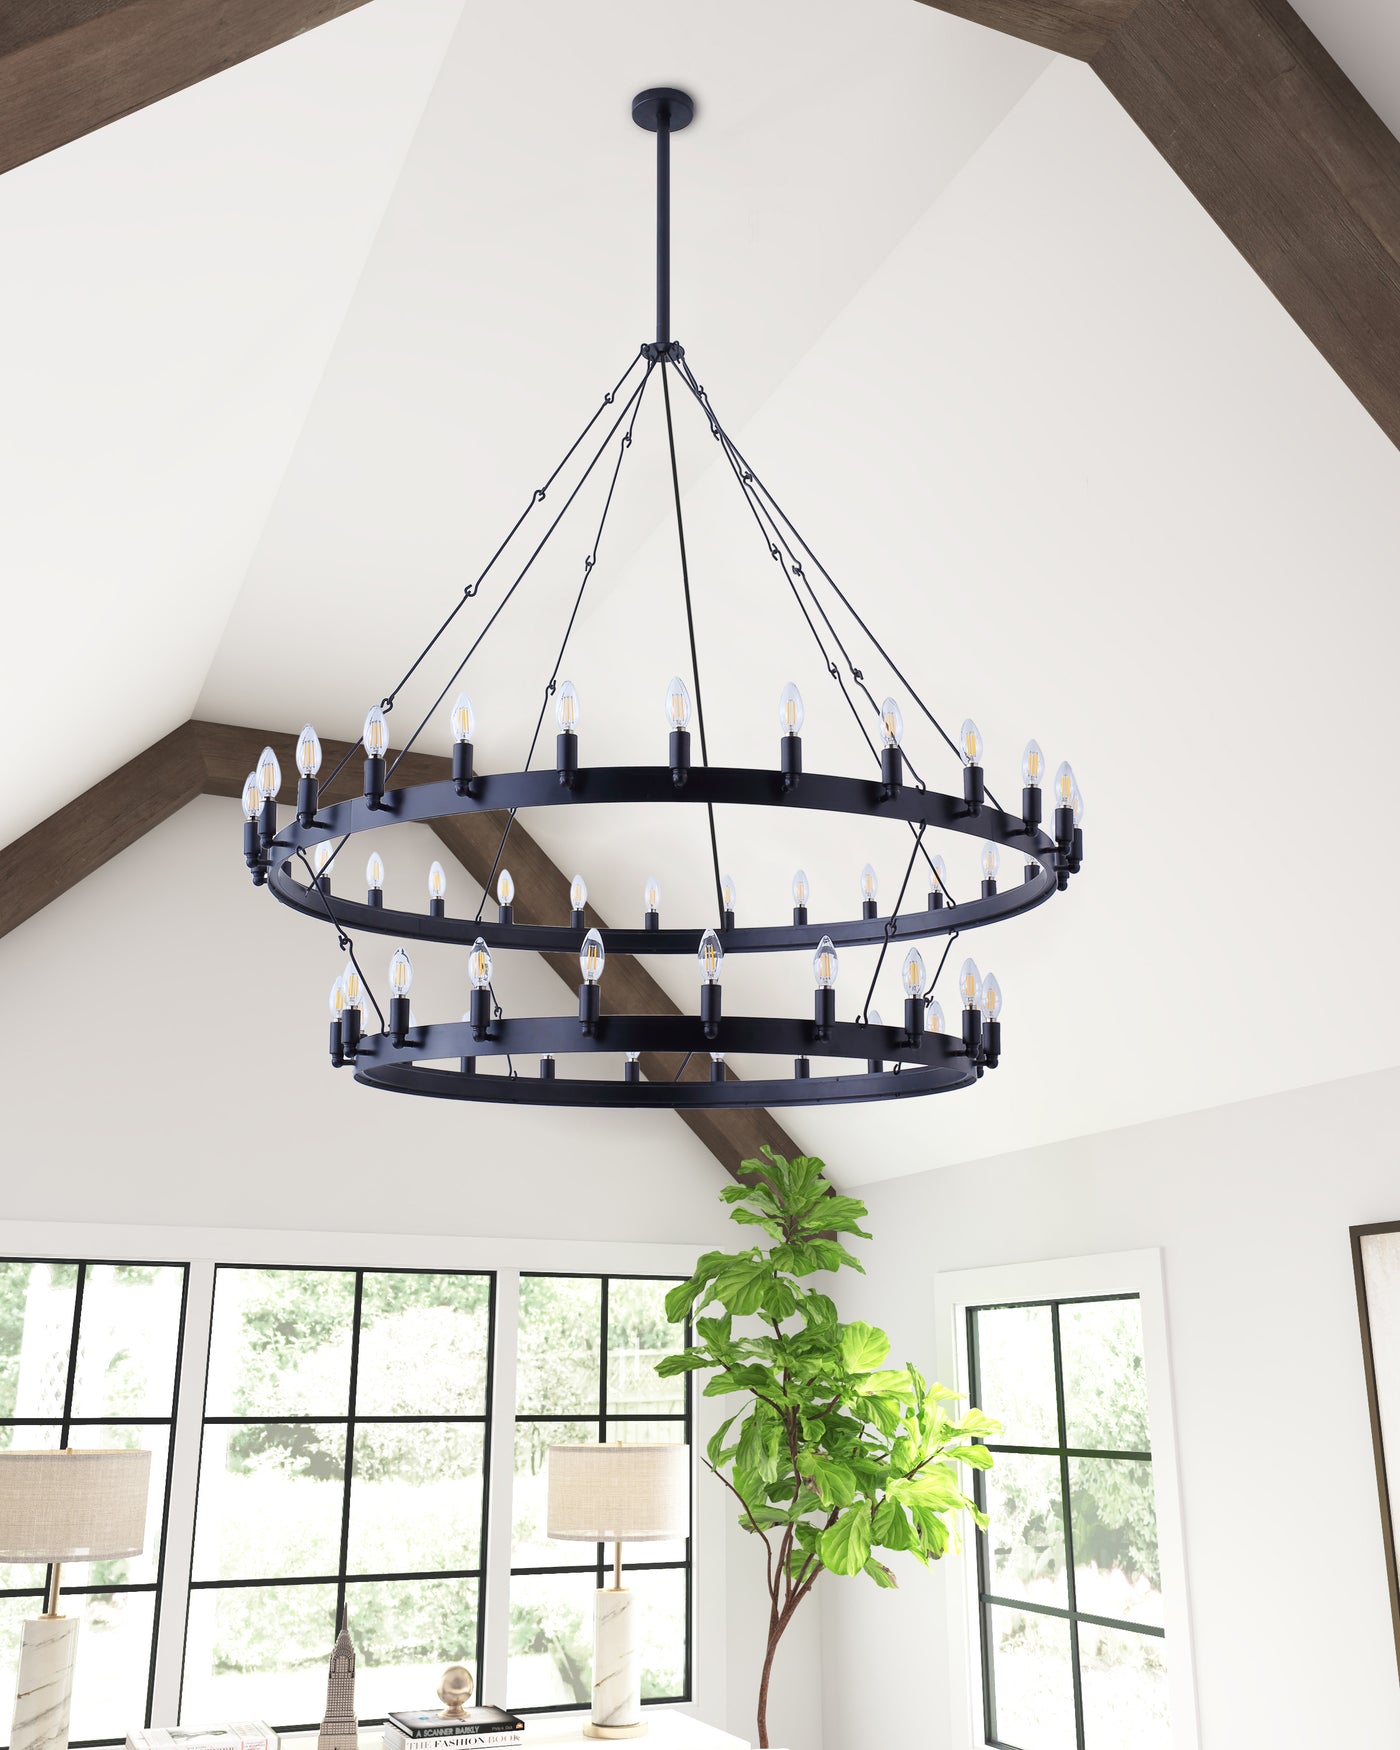 48-Lights Wheel-Shaped With Double Tiers Chandelier